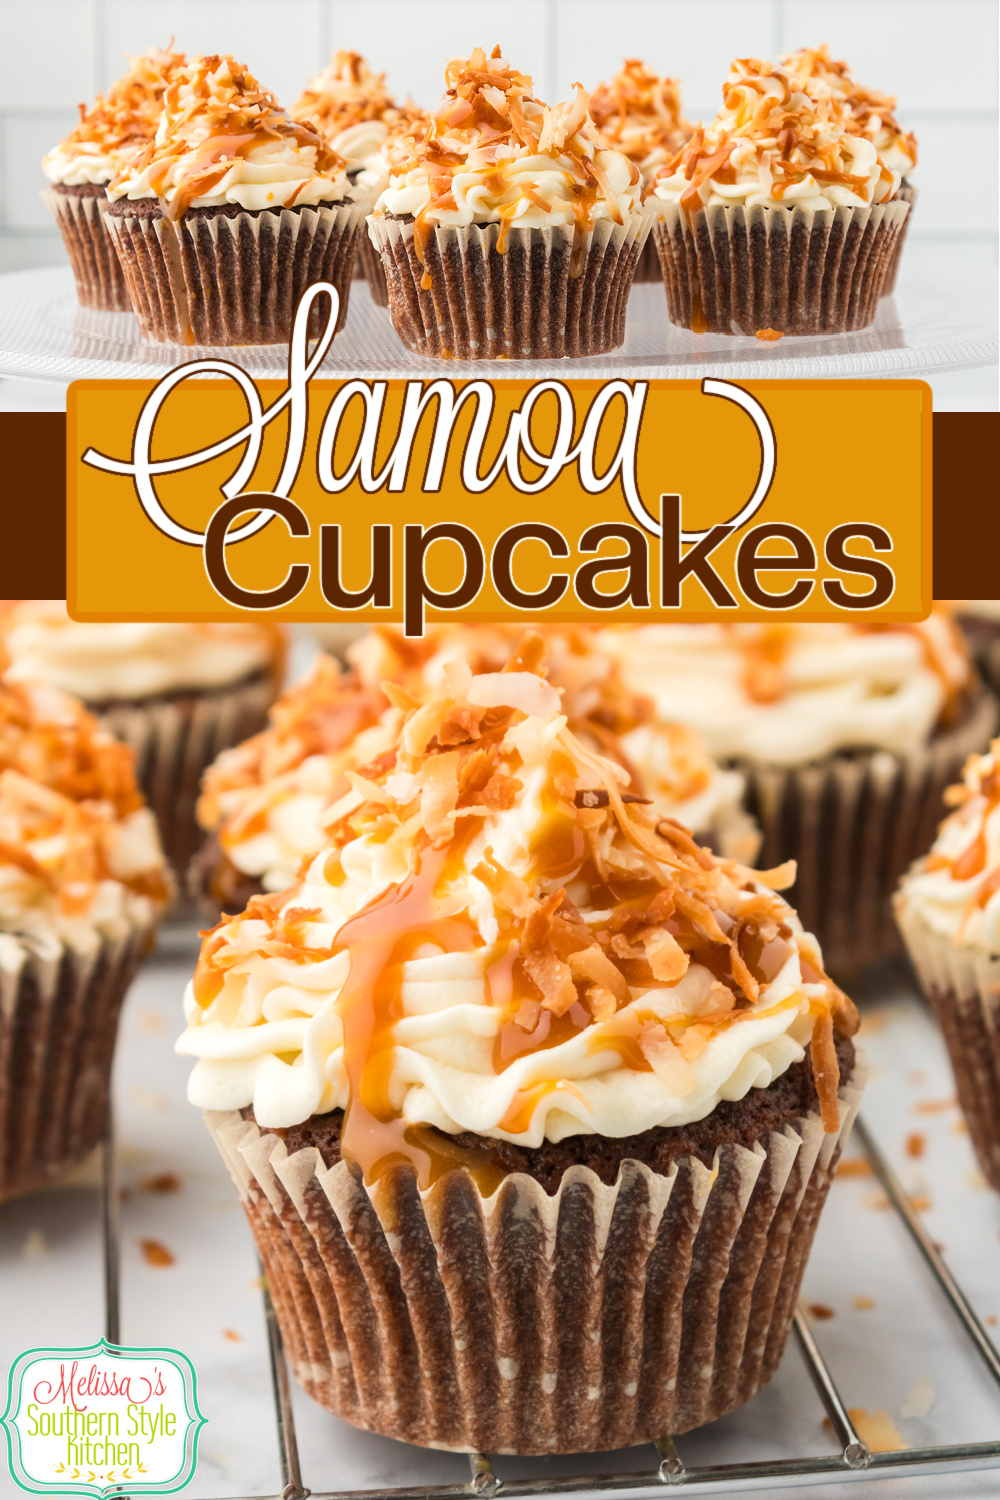 This Samoa Cupcakes recipe features a chocolate cupcake and buttercream icing topped with toasted coconut and a drizzle of caramel sauce. #samoacookies #samoacupcakes #easycupcakerecipes #howtomakecupcakes #chocolatecake #chocolatecupcakes #cupcakerecipes #buttercreamicing via @melissasssk